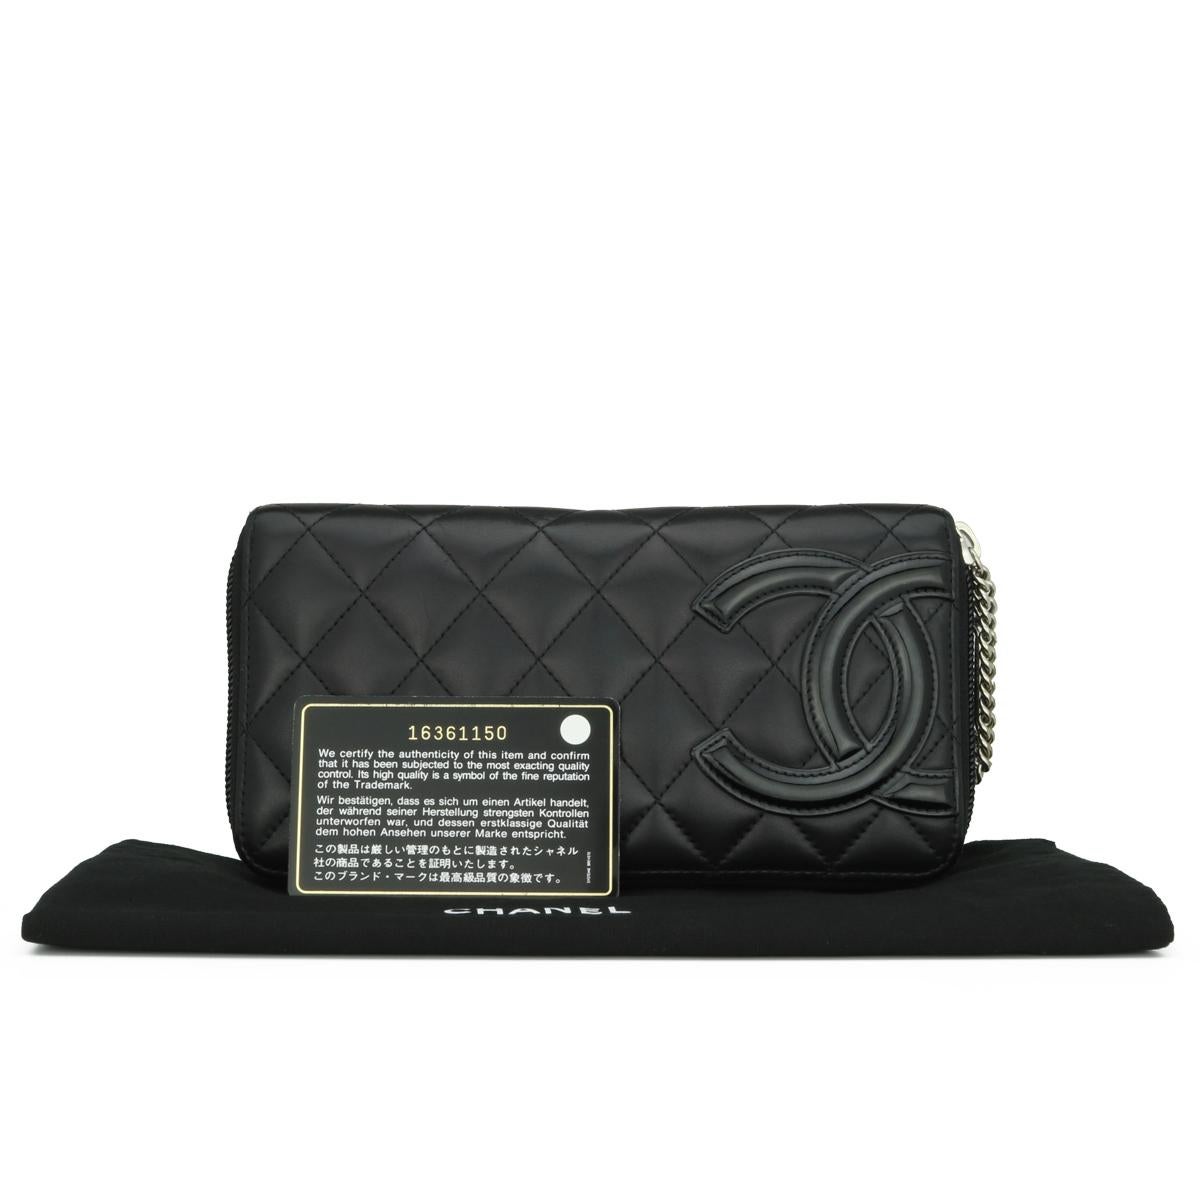 CHANEL Quilted Cambon Long Zipped Wallet Black Calfskin with Silver-Tone Hardware 2012.

This stunning large zipped wallet is in good condition. It still holds its original shape, and the hardware is still very shiny. It is such a gorgeous,